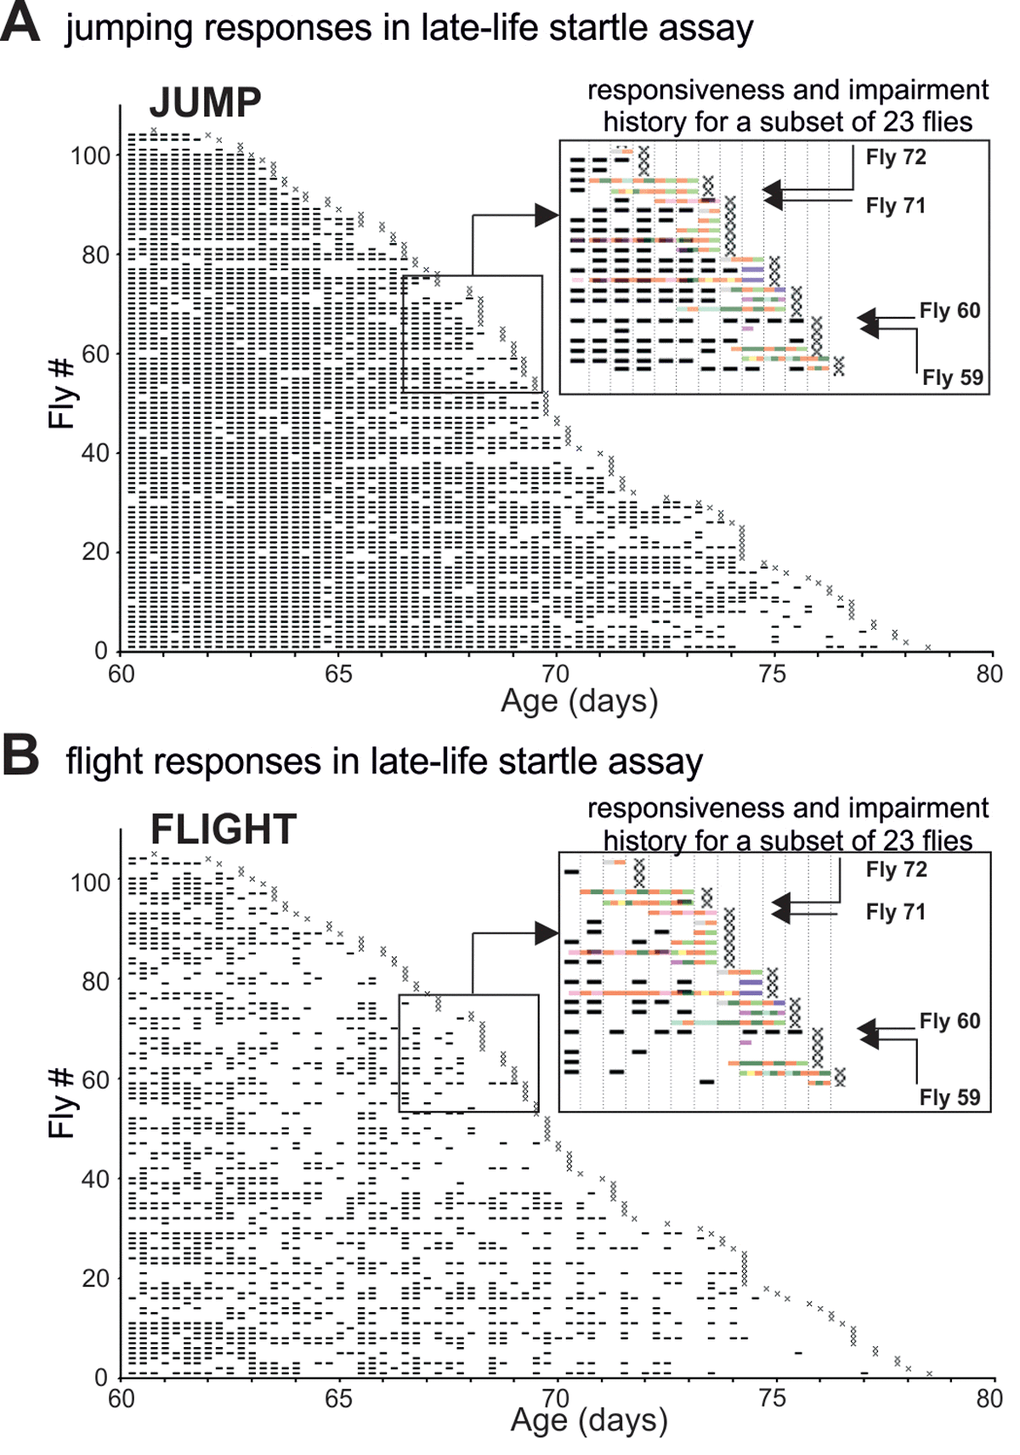 The pathophysiology of motor performance in the startle assay. (A-B) Event-history charts depict jump (A) and flight (B) responses of 104 males tested individually every 6 hours between 60d of age and death (see also Figure 1 A). For each fly and each trial responsiveness is indicated by a dash and irresponsiveness by a blank. Insets show overlays of the impairment history (see Figure 1A-C) and the jump/flight responses for a subset of individuals. Note that impairment span was accompanied by a significant reduction in the numbers of jump or flight responses. Four individual flies (F59, F60, F71, F72) were selected as representative case-reports. Fly 59 exhibited paradoxical behavior 18h prior to death and showed no jumping or flight responses during the last 60h of life. Fly 60 showed no impairment and responded with jumping or flight at almost every single trial. Fly 71 was diagnosed with mild climbing impairment and left femur-tibia joint immobility 18 h prior to death. It performed jump but no flight responses. Fly 72 had a defective prothoracic femur-tibia joint and showed multiple climbing defects already 30 hours prior to death. It failed to respond at every late-life trial.